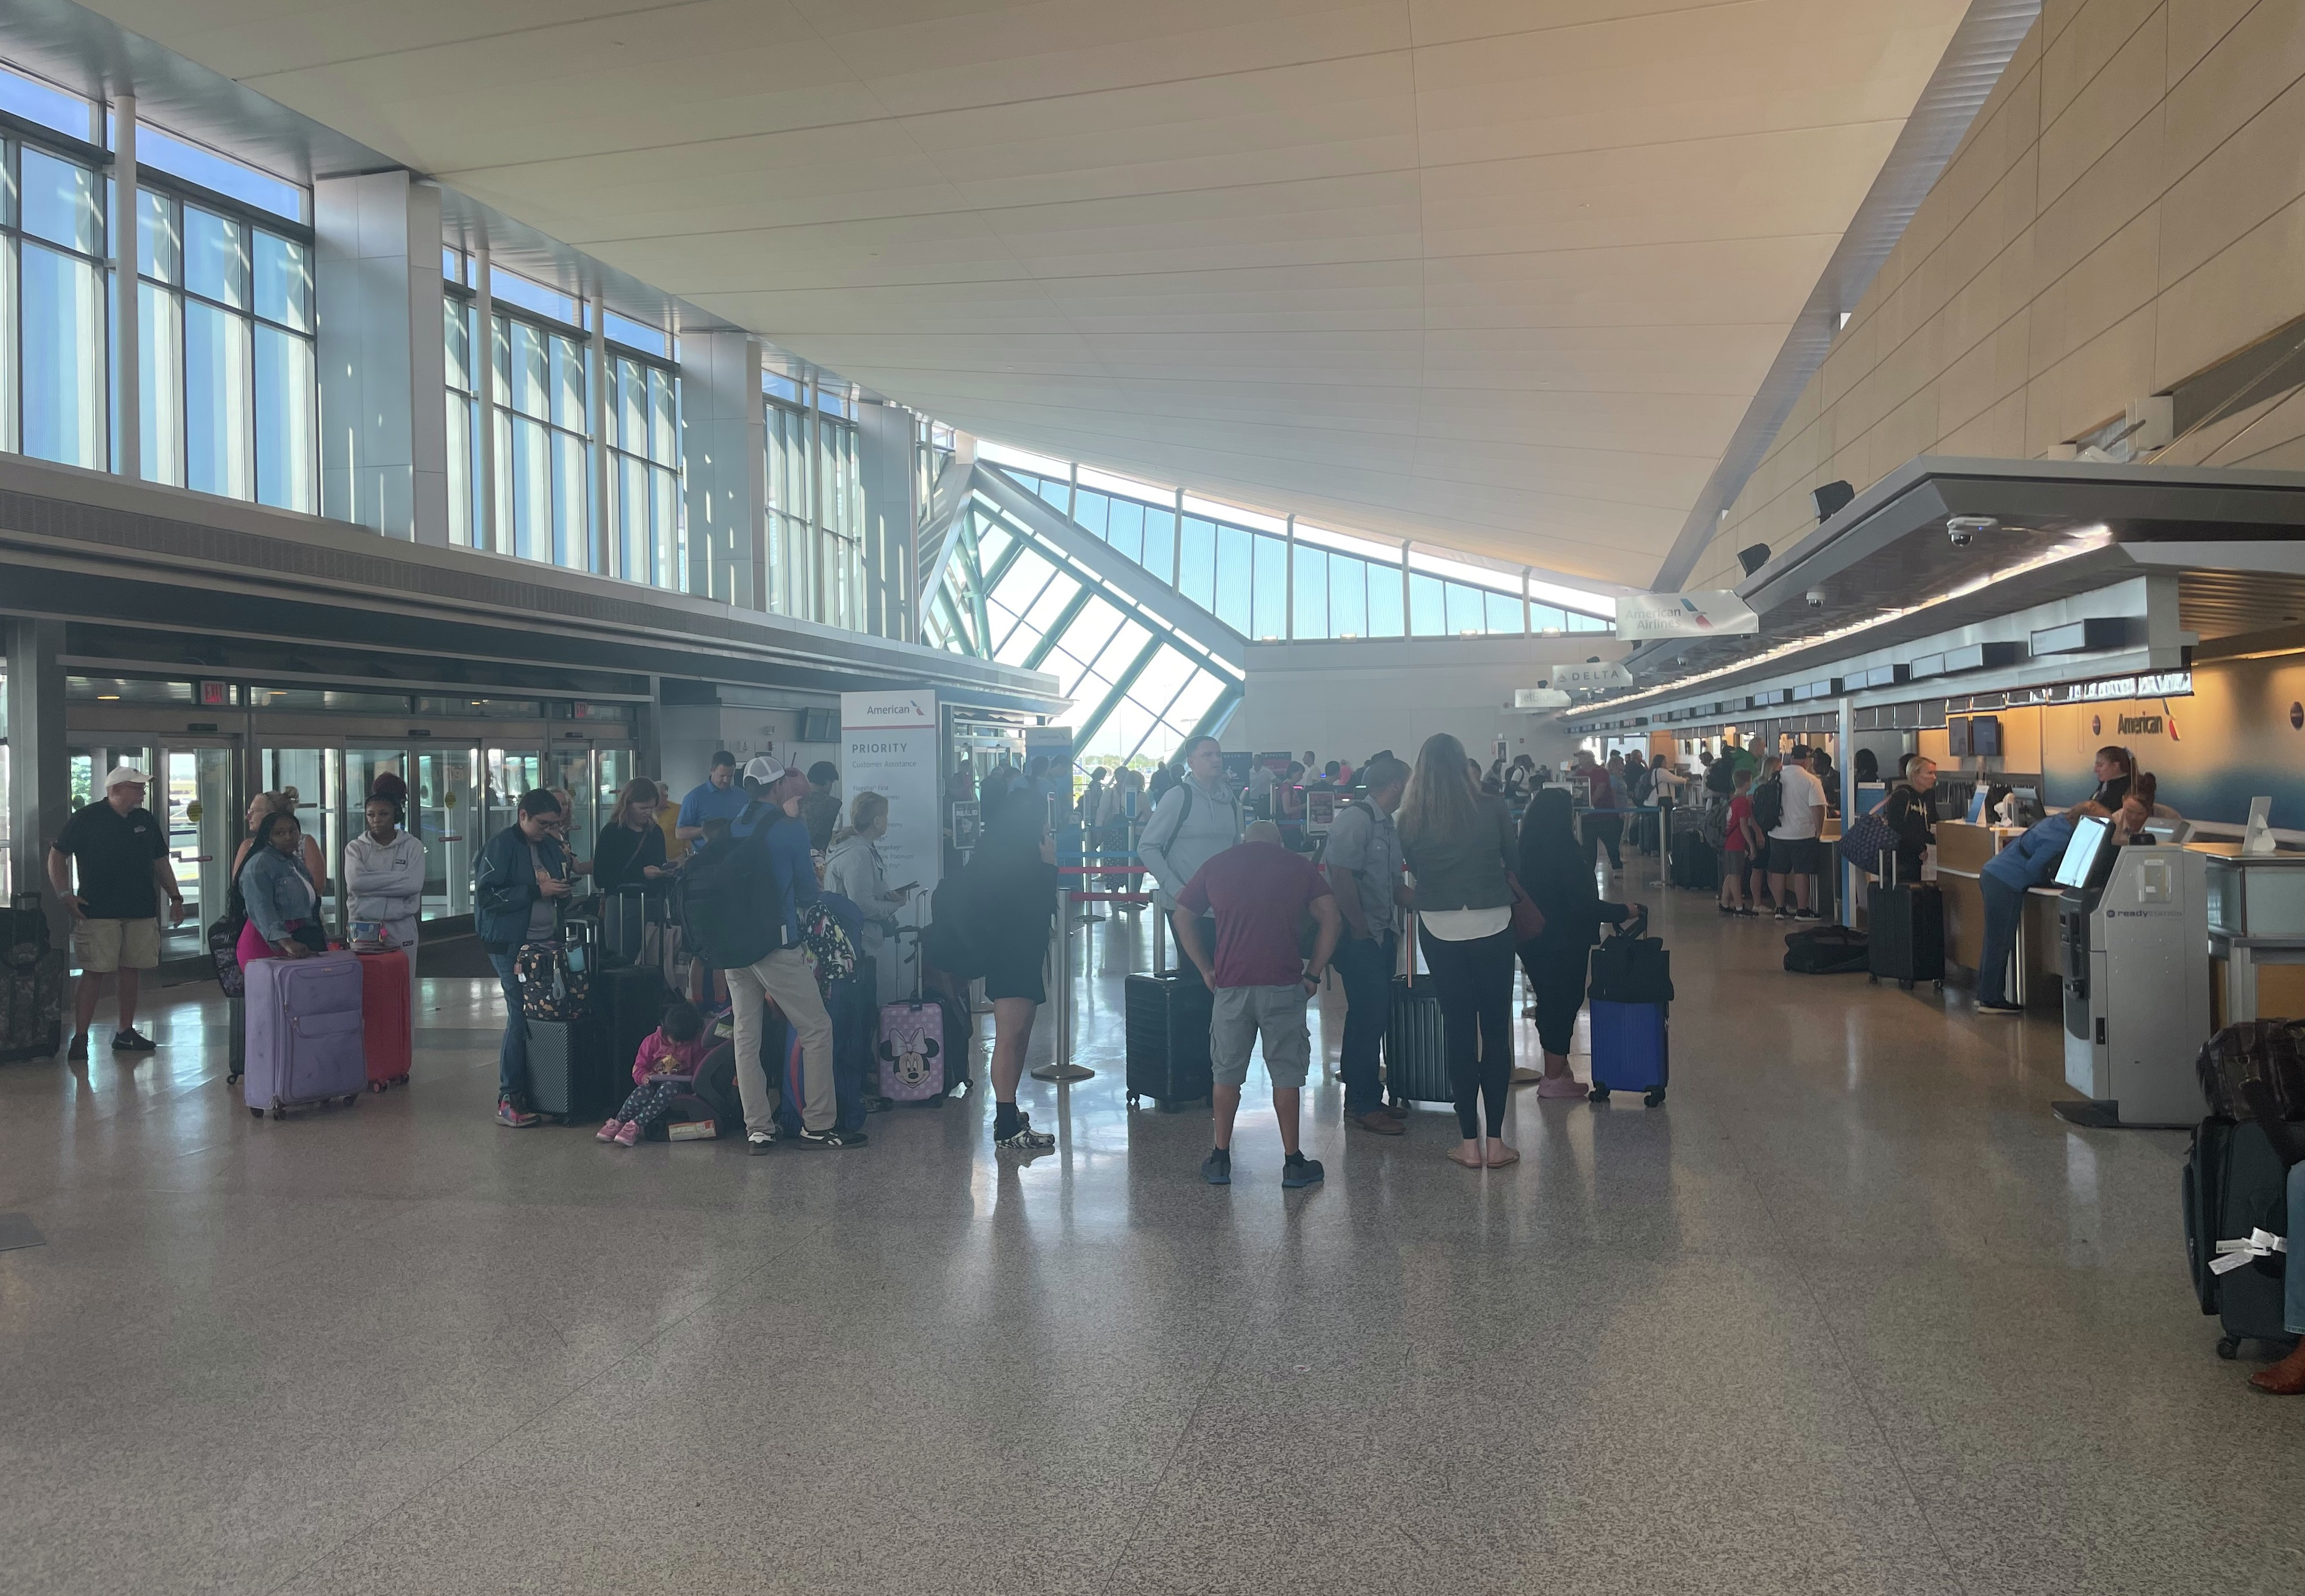 Scott from Depew affected by the outage issues at the Buffalo Niagara International Airport on Friday morning